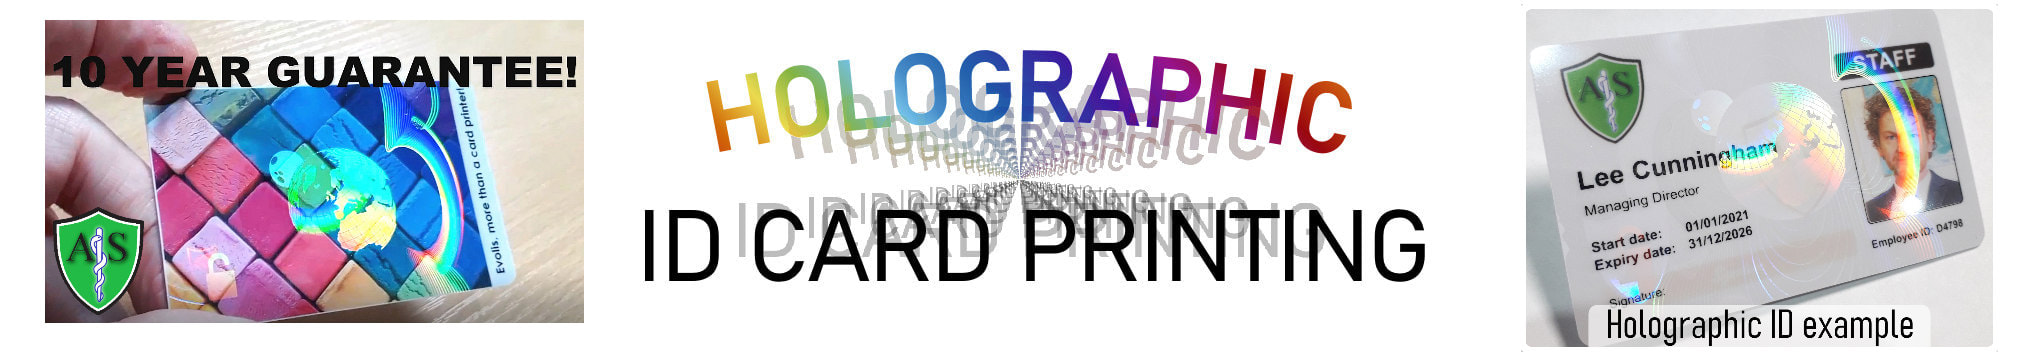 Brighton holographic ID card print service. Employee Identity cards with hologram or holograph security mark.